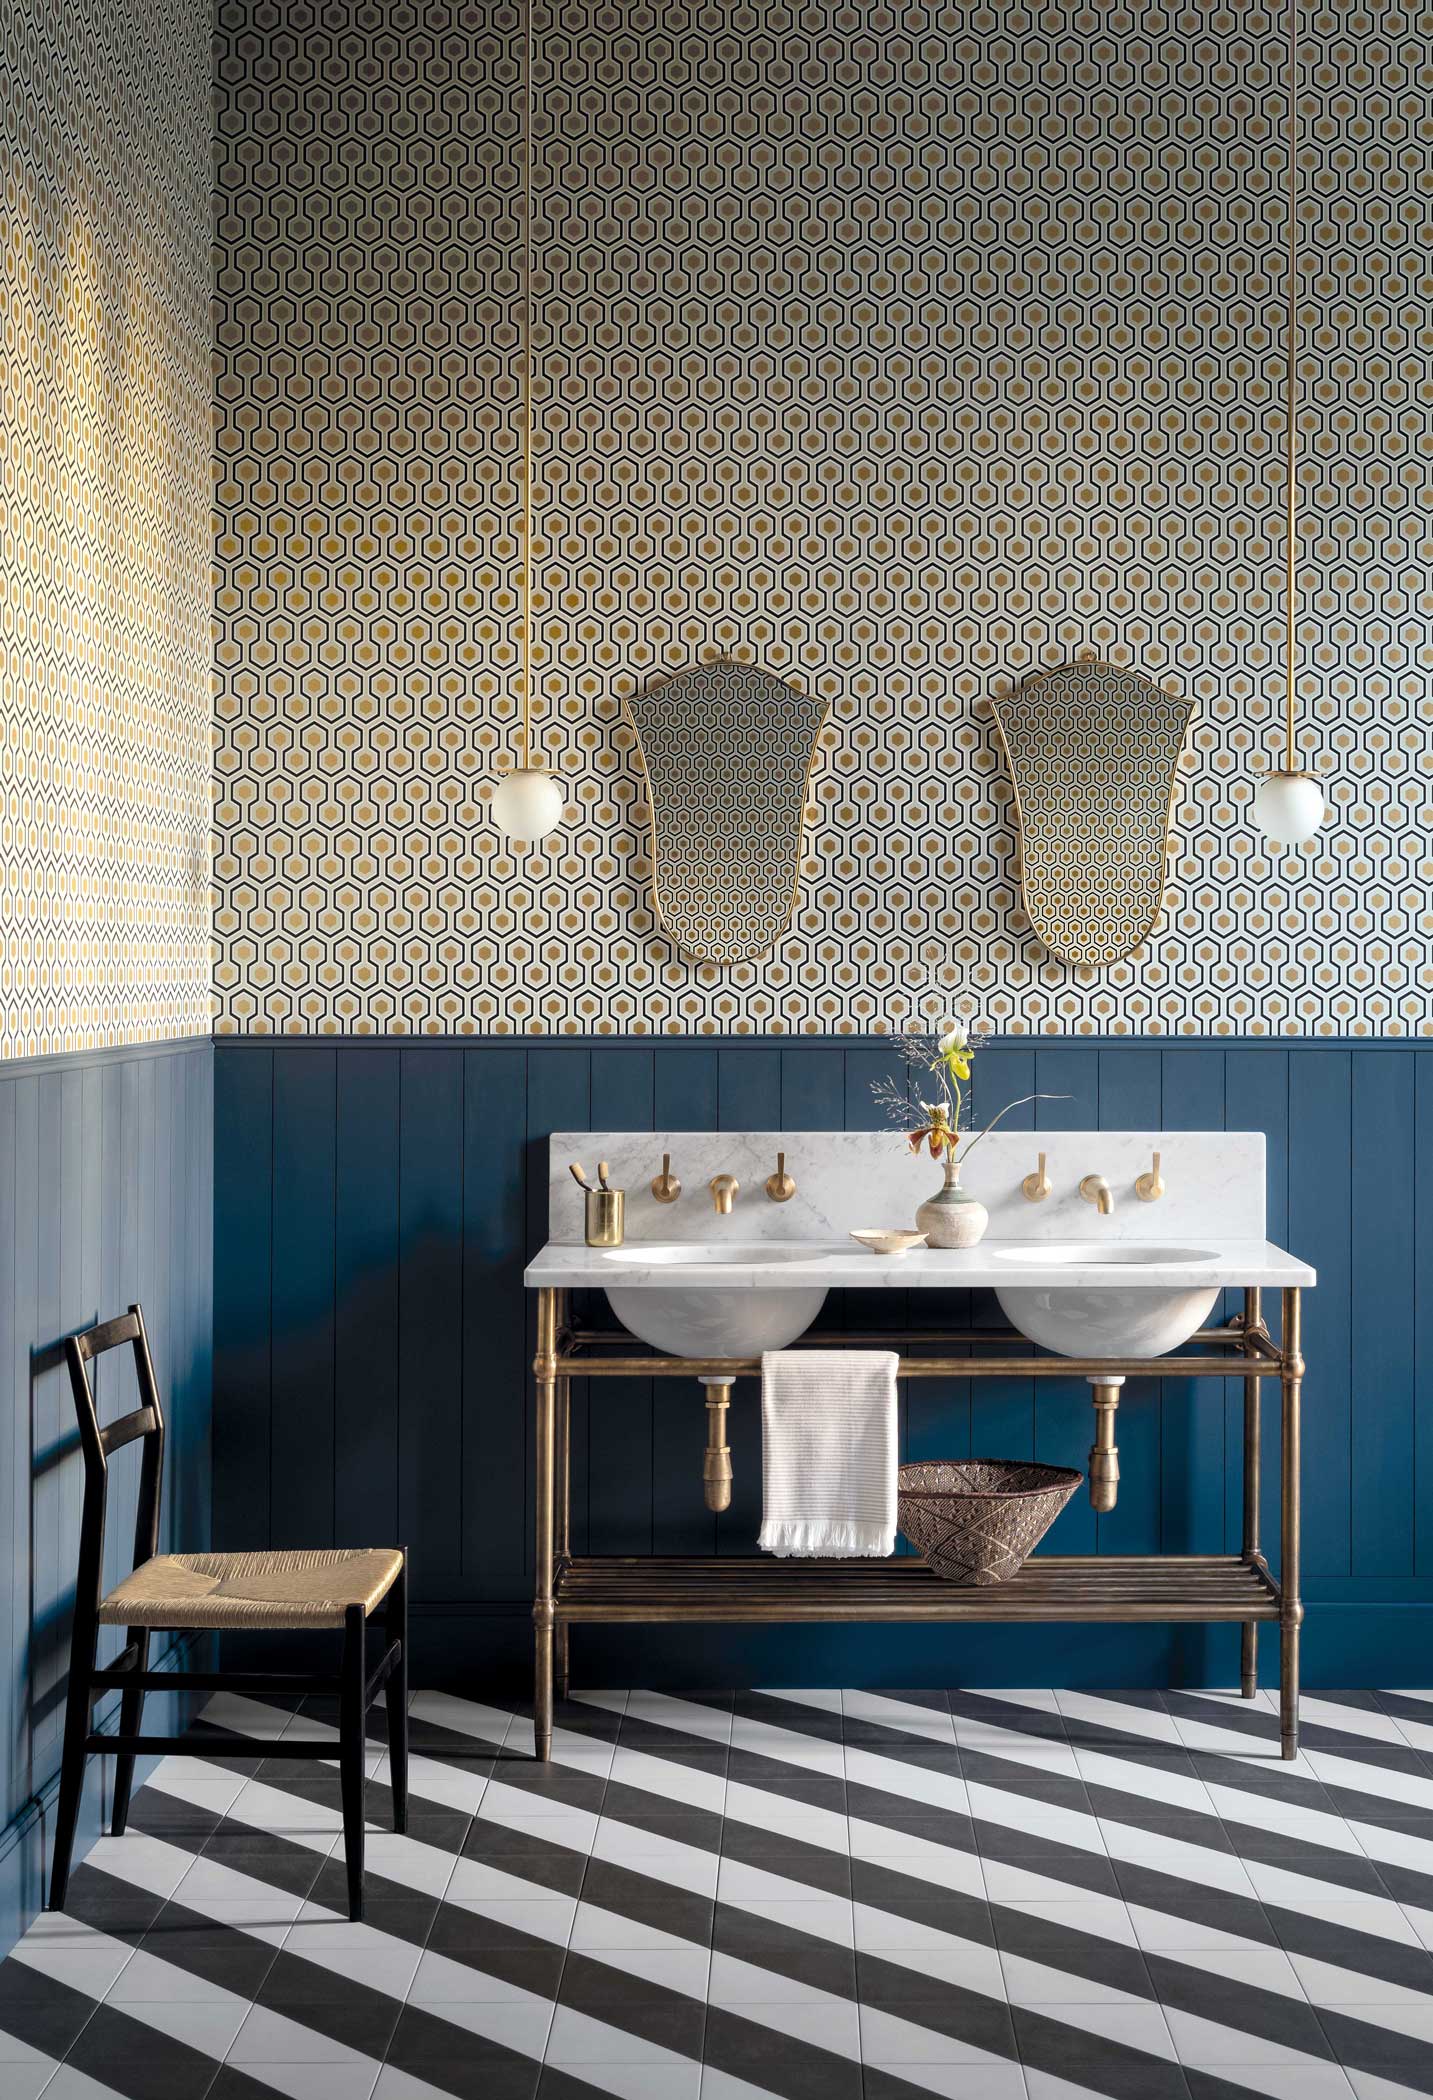 Wallpaper - Cole and Son - New Contemporary- Hicks' Hexagon - Teal And Gold